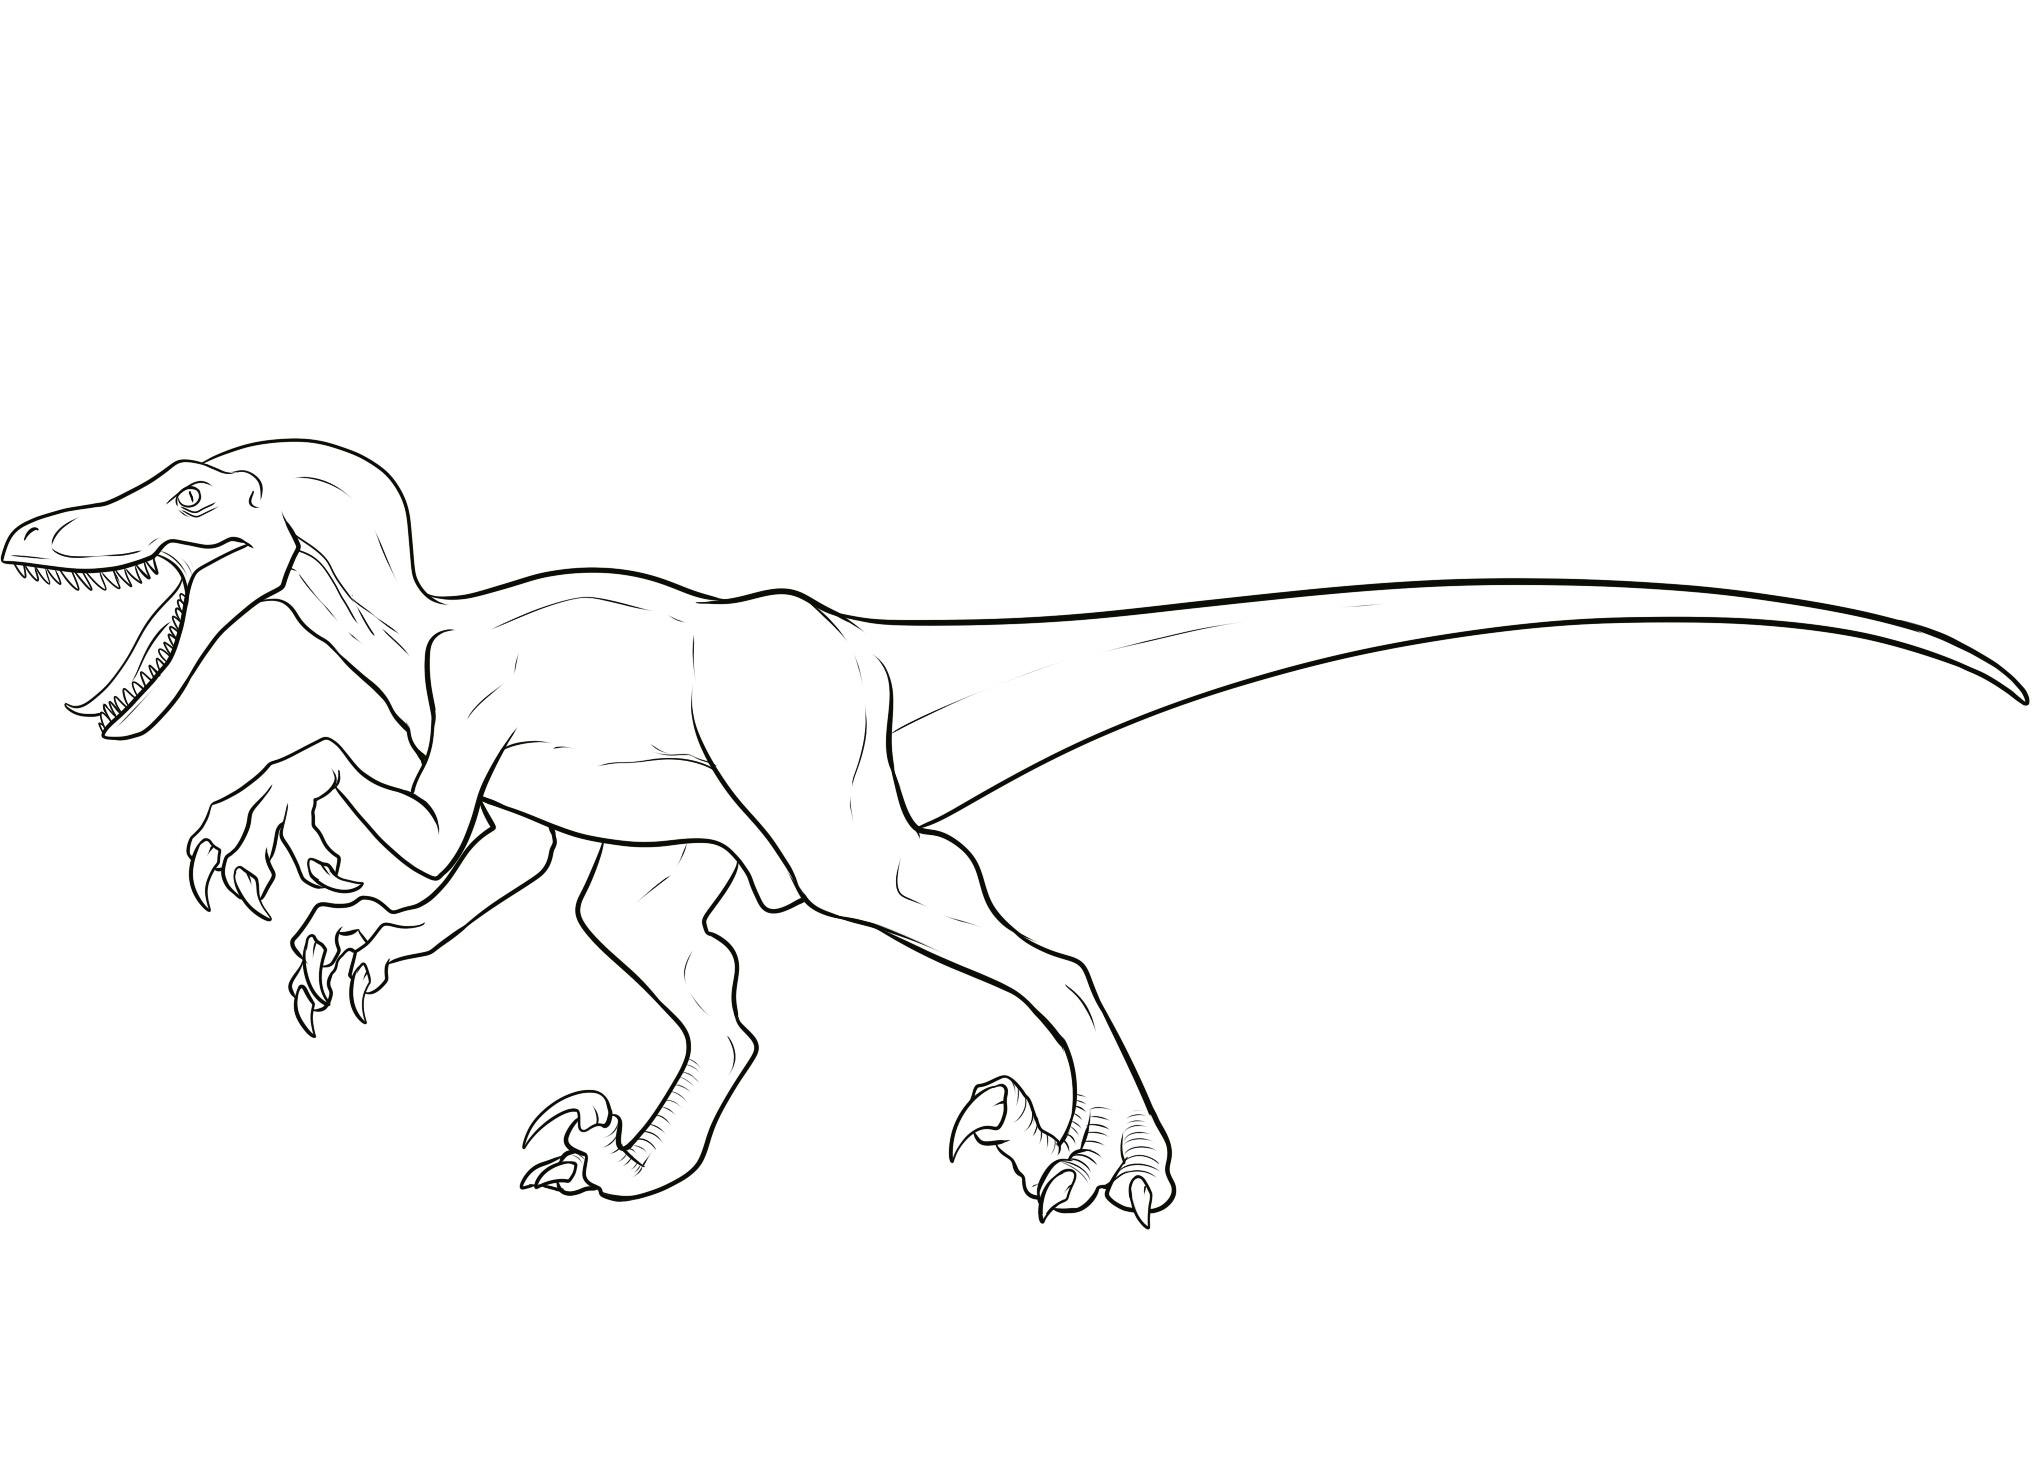 Download Velociraptor Coloring Pages Best Coloring Pages For Kids